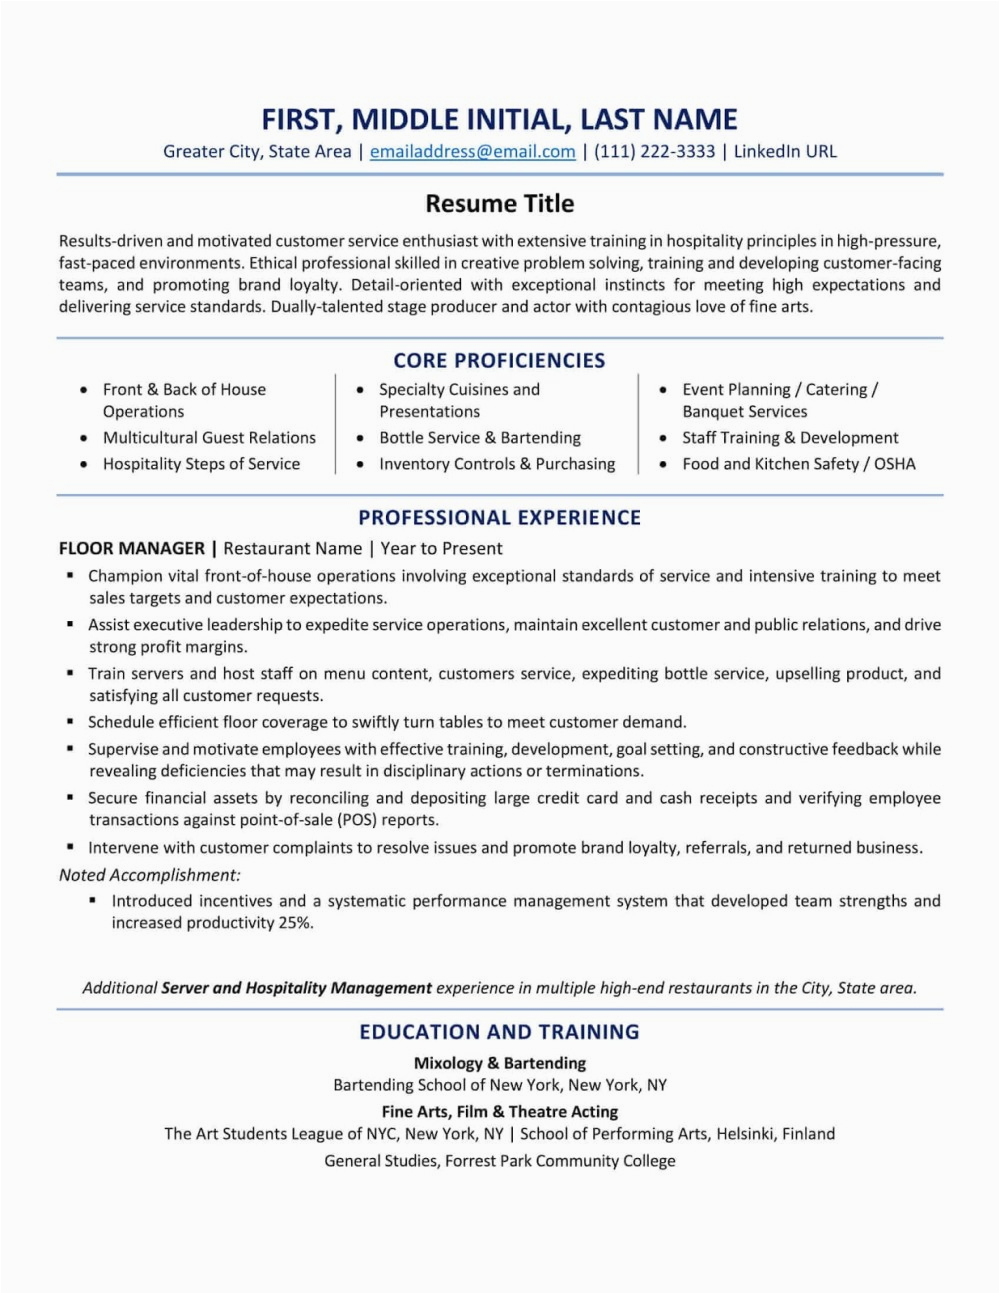 Sample Resume to Get Past ats ats Resume Test Free ats Checker & formatting Examples 2021